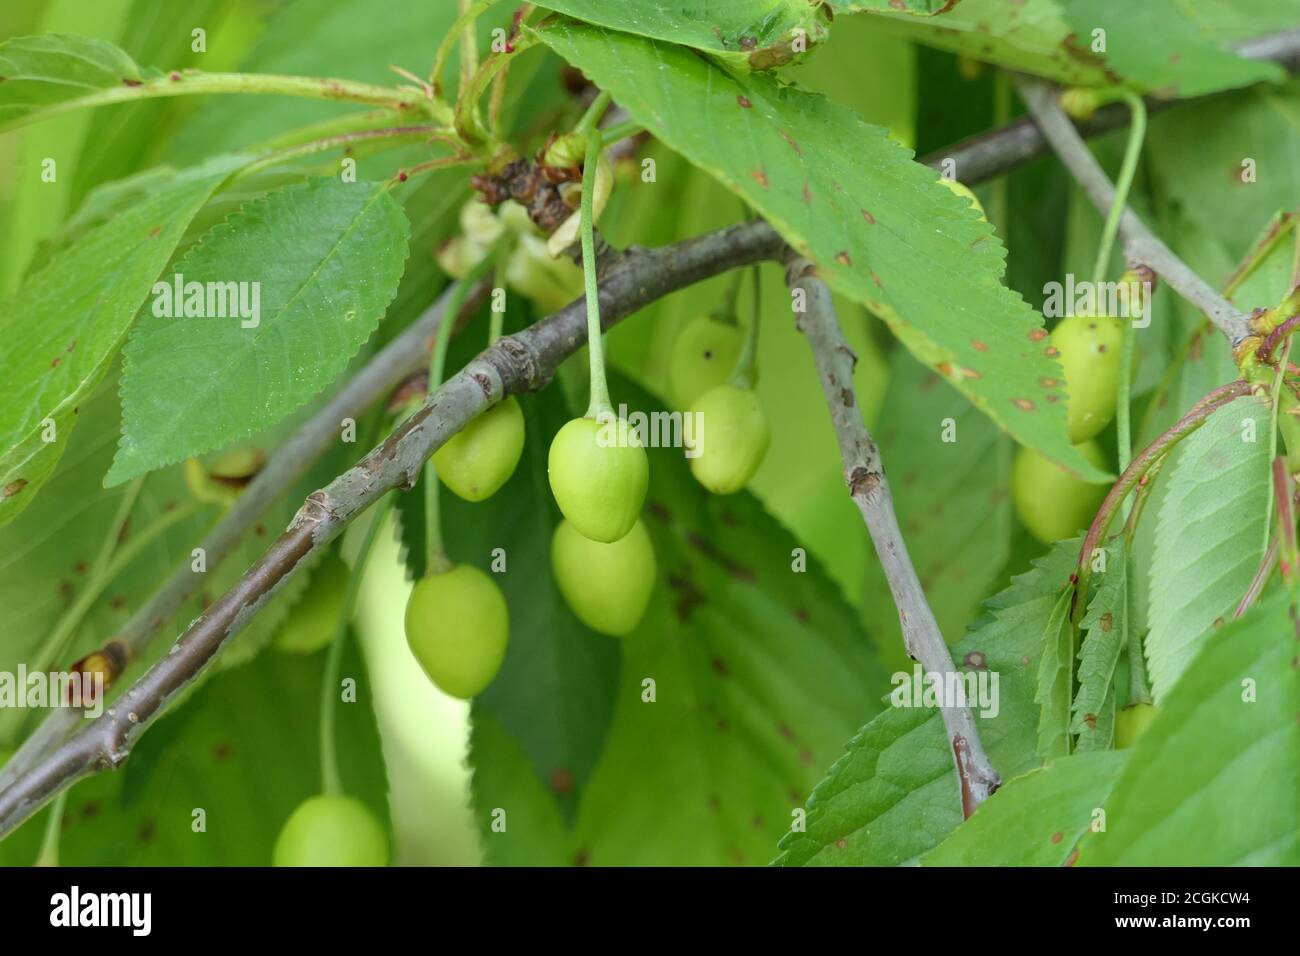 Close-up of green unripe cherries on a branch in early summer Stock Photo